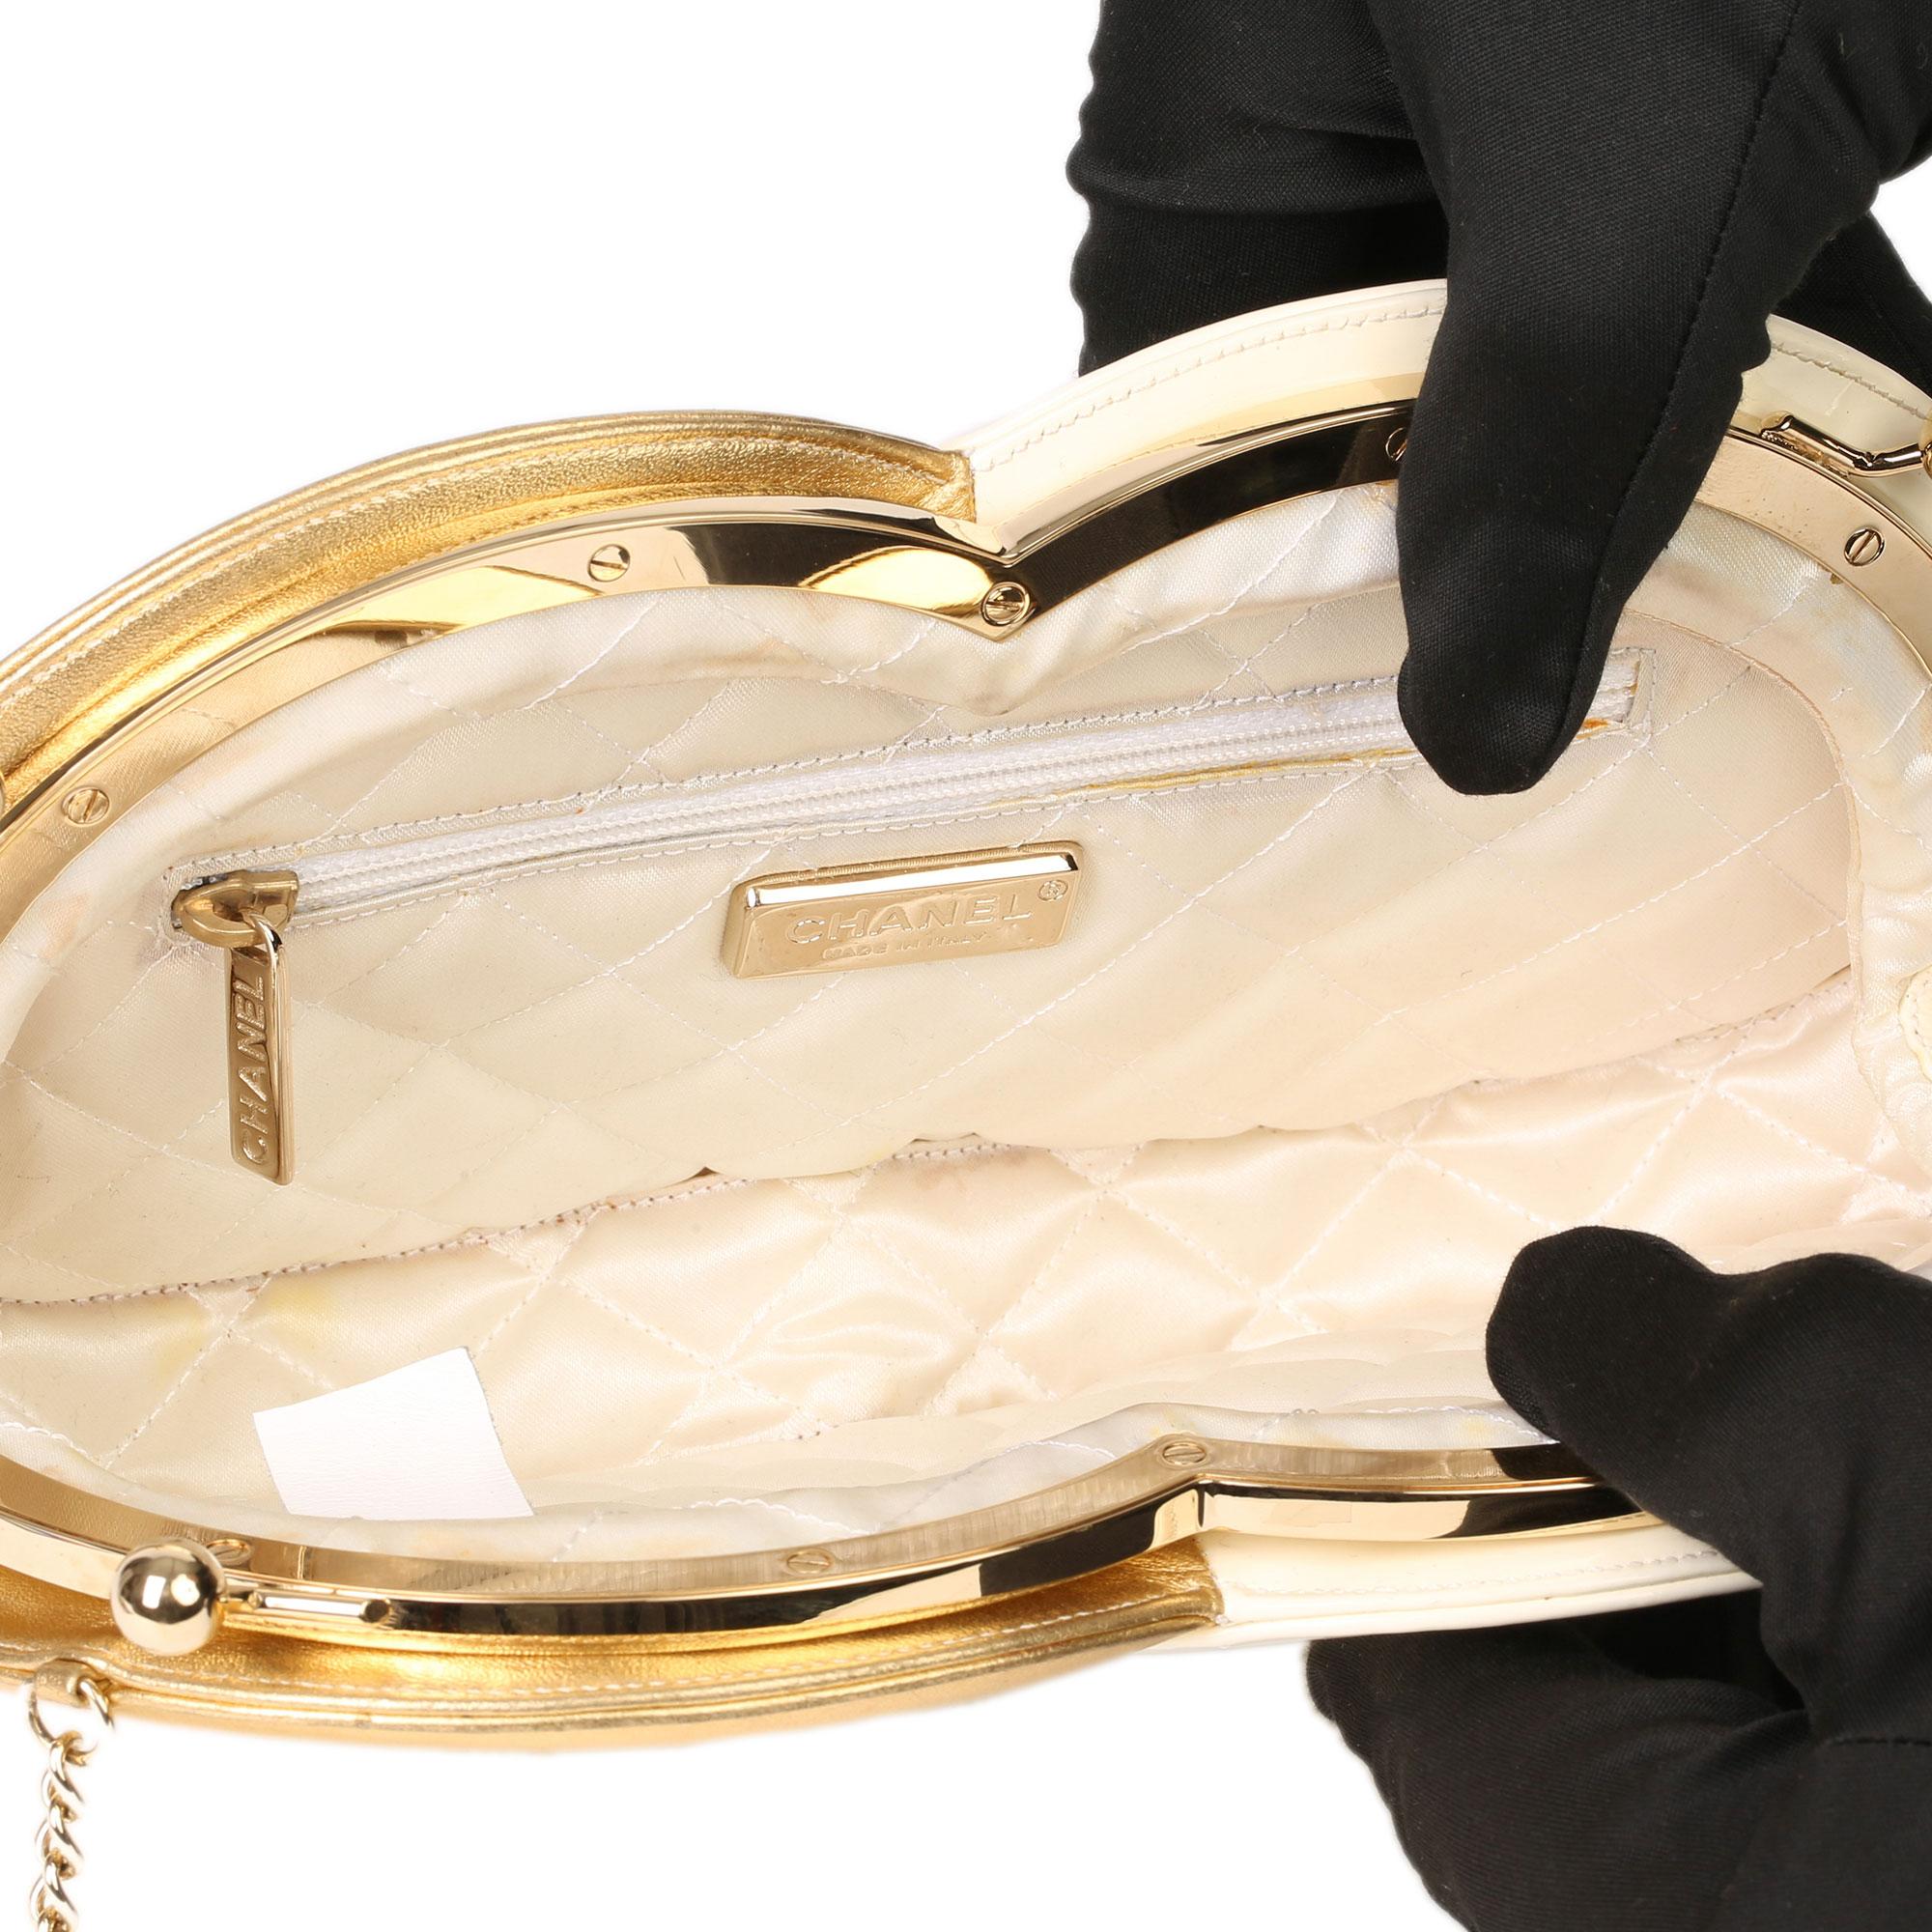 CHANEL
Gold Lambskin & Beige Patent Leather Double Circle Clutch

Serial Number: 11321198
Age (Circa): 2007
Accompanied By: Chanel Dust Bag, Authenticity Card
Authenticity Details: Serial Sticker, Authenticity Card (Made in Italy)
Gender: